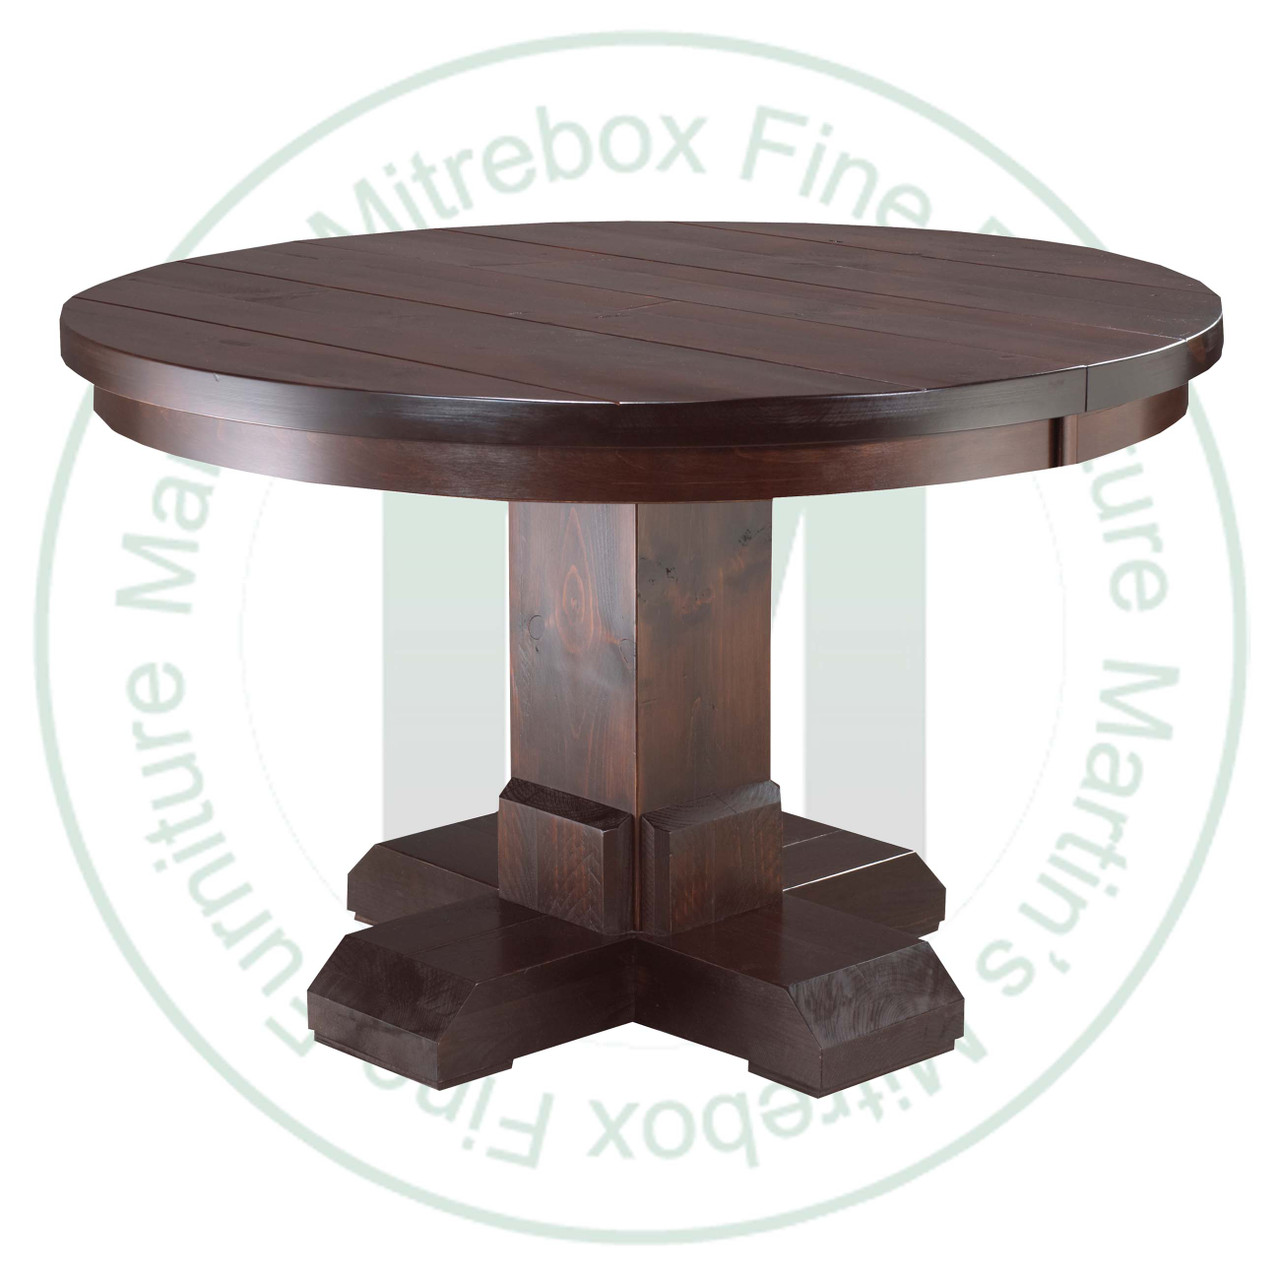 Wormy Maple Shrewsbury Single Pedestal Table 60''D x 60''W x 30''H Round Solid Table. Table Has 1.25'' Thick Top.